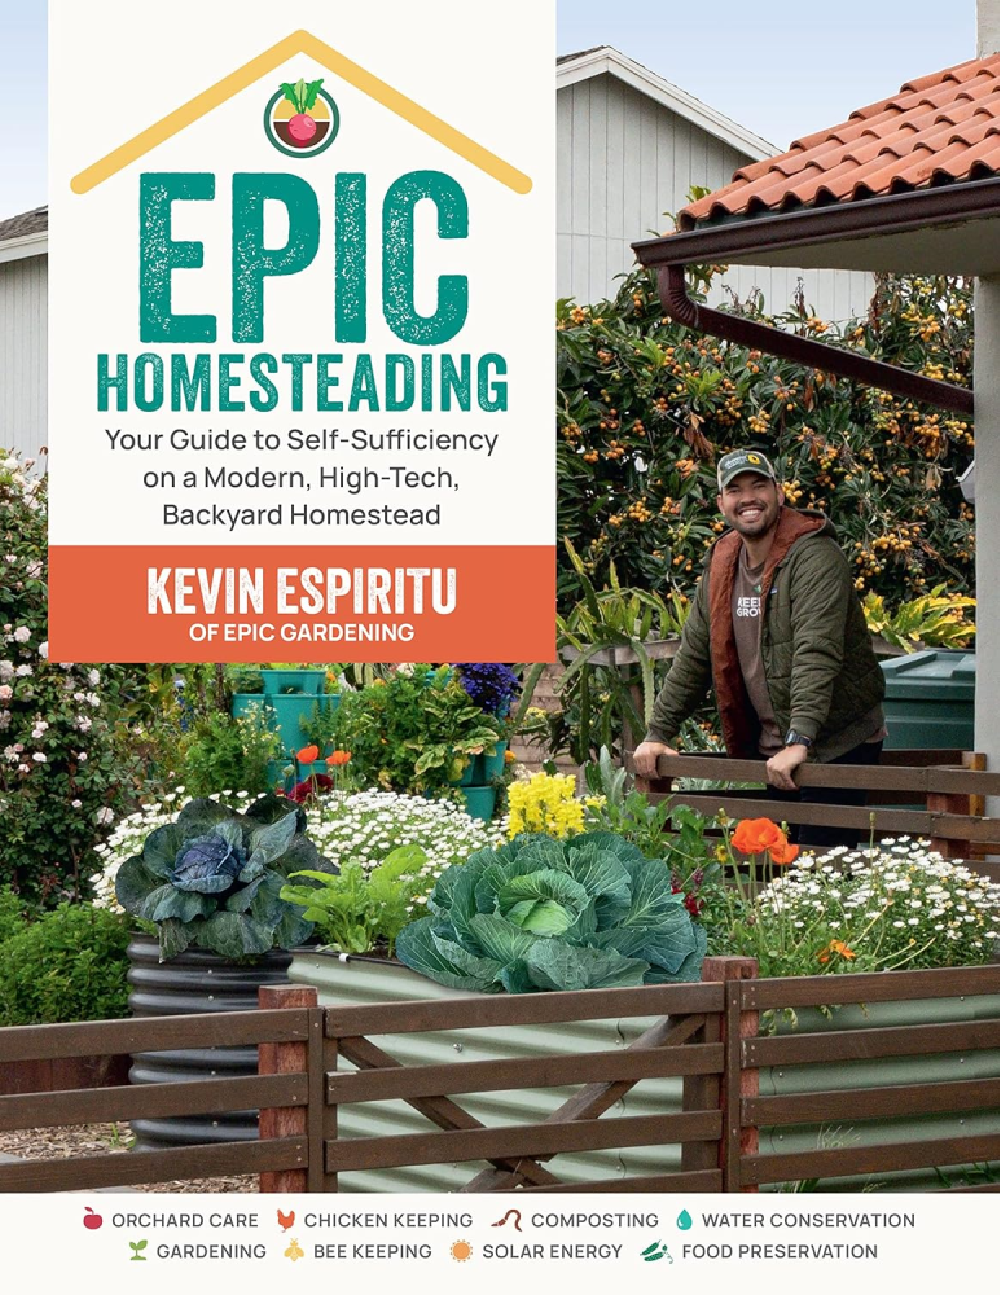 Epic Homesteading - Your Guide to Self-Sufficiency on a Modern, High-Tech, Backyard Homestead